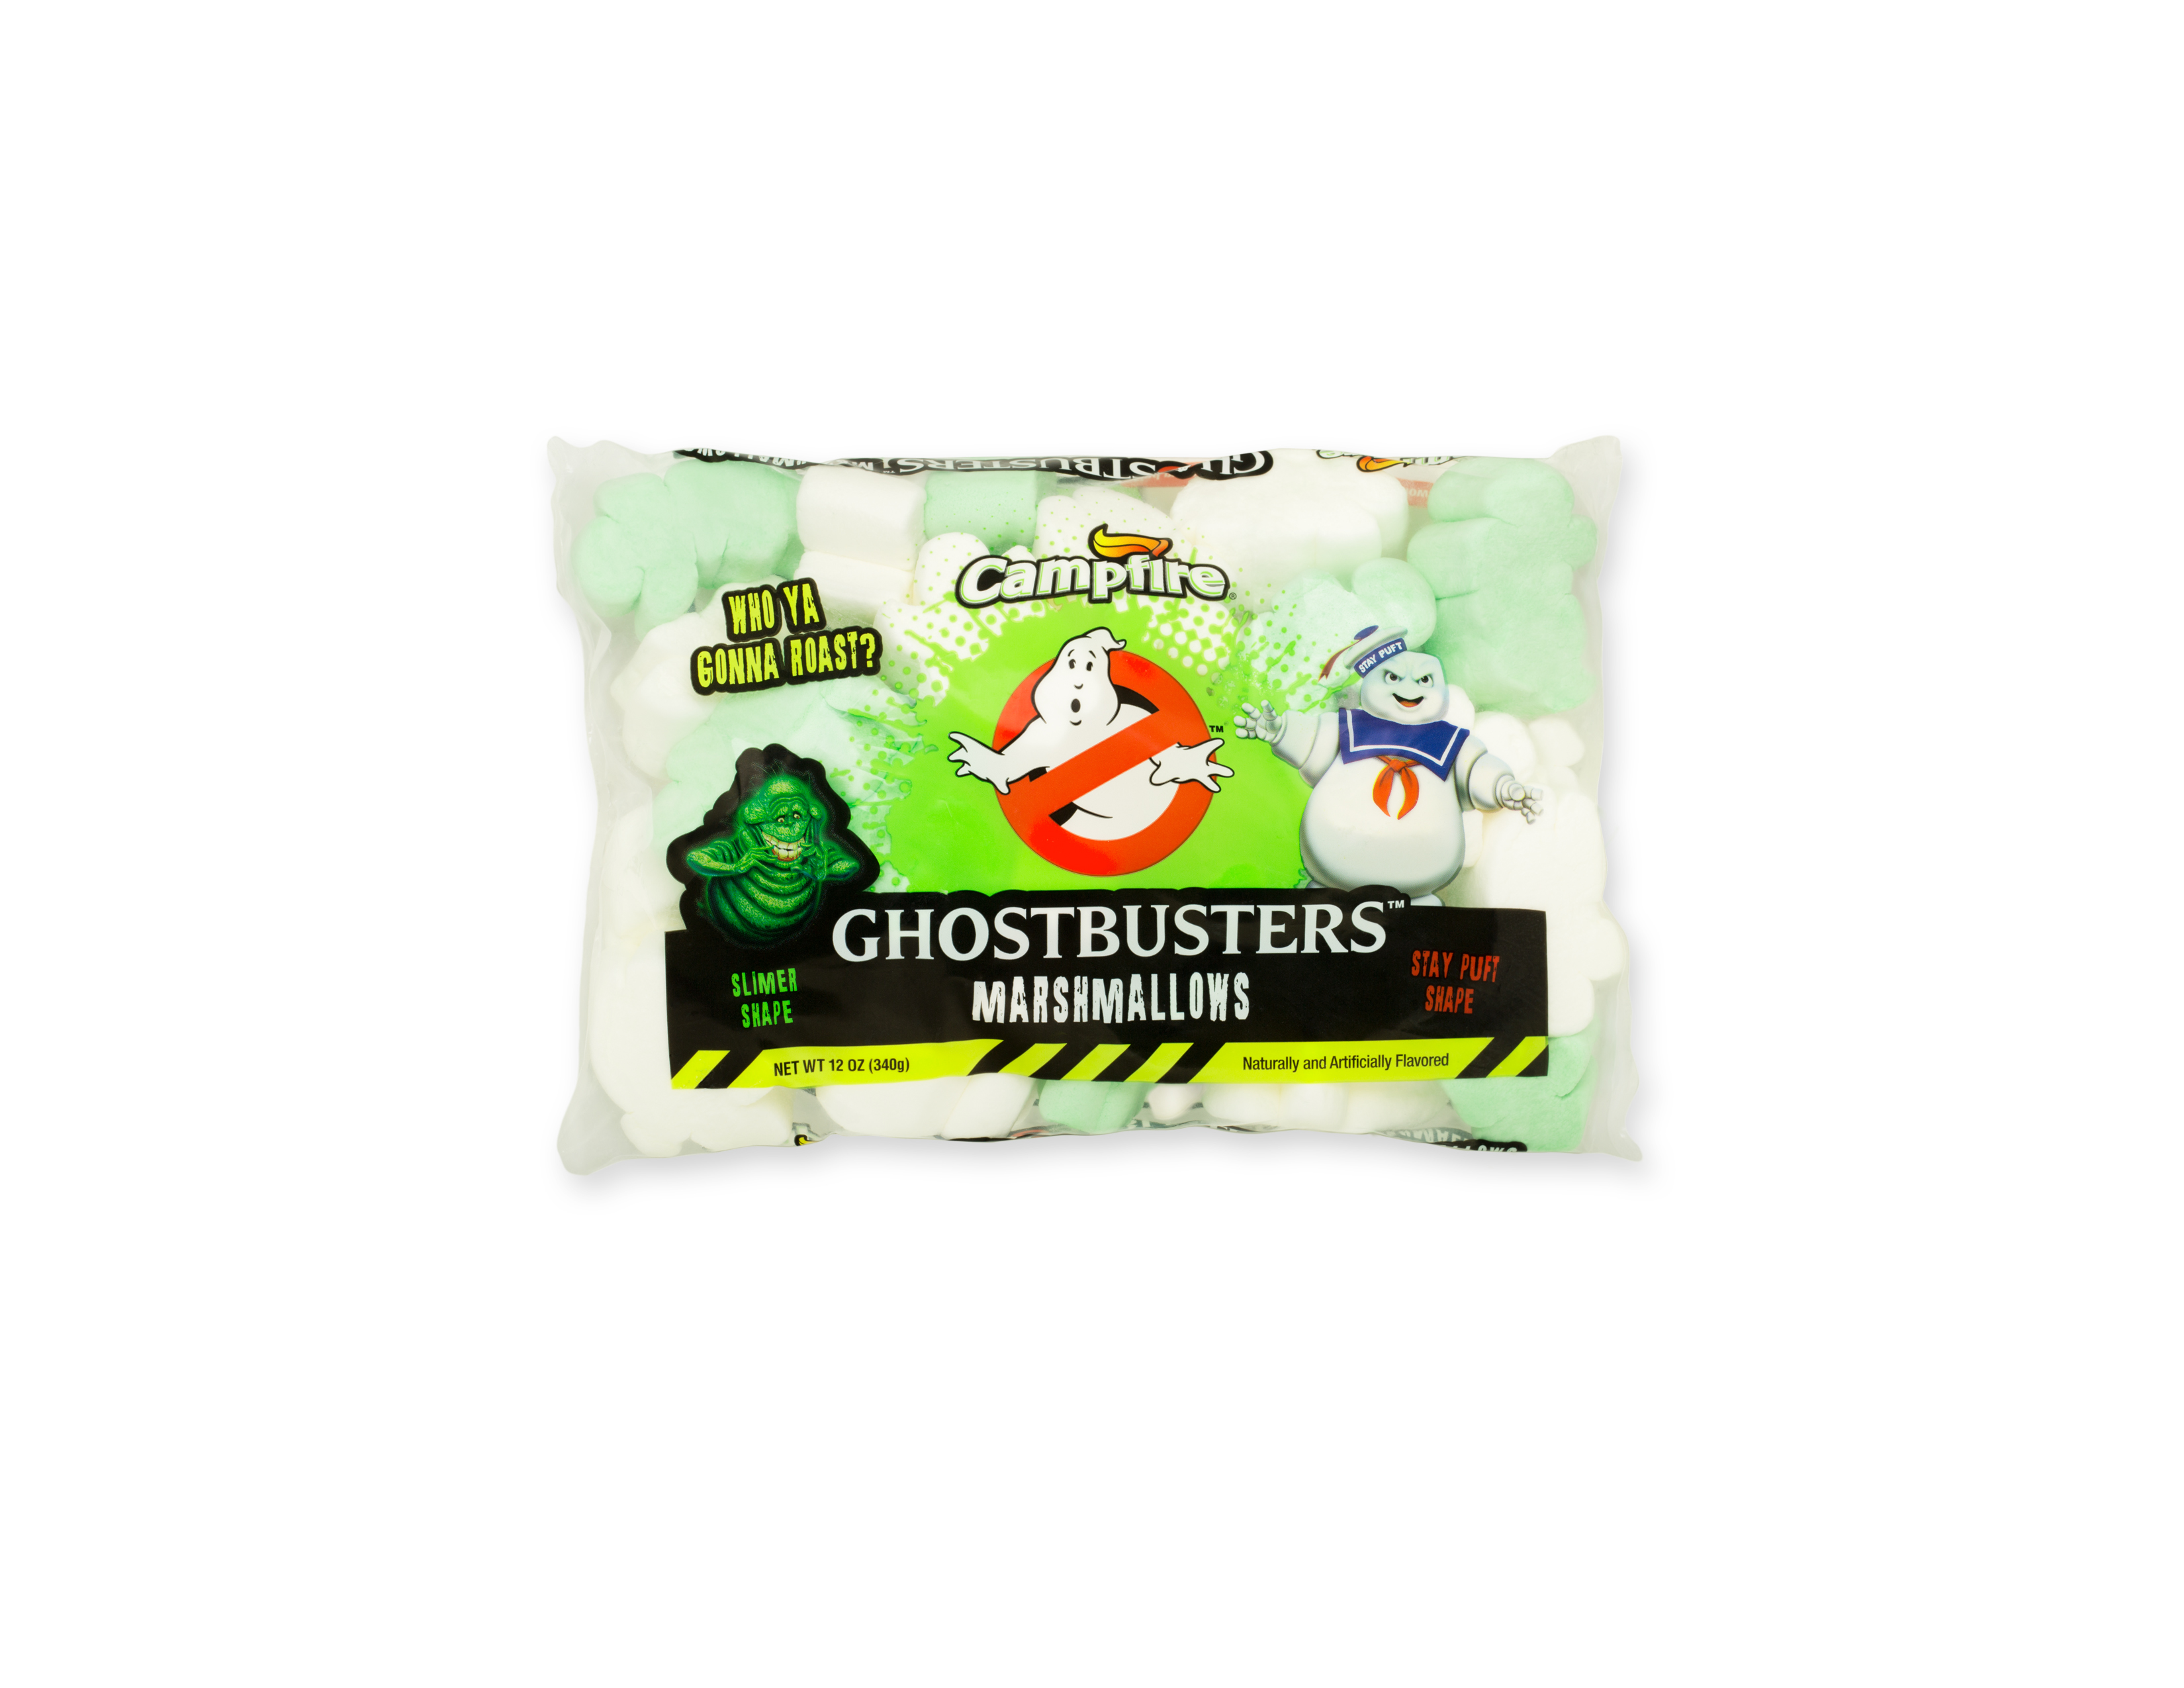 Campfire Ghostbusters product package